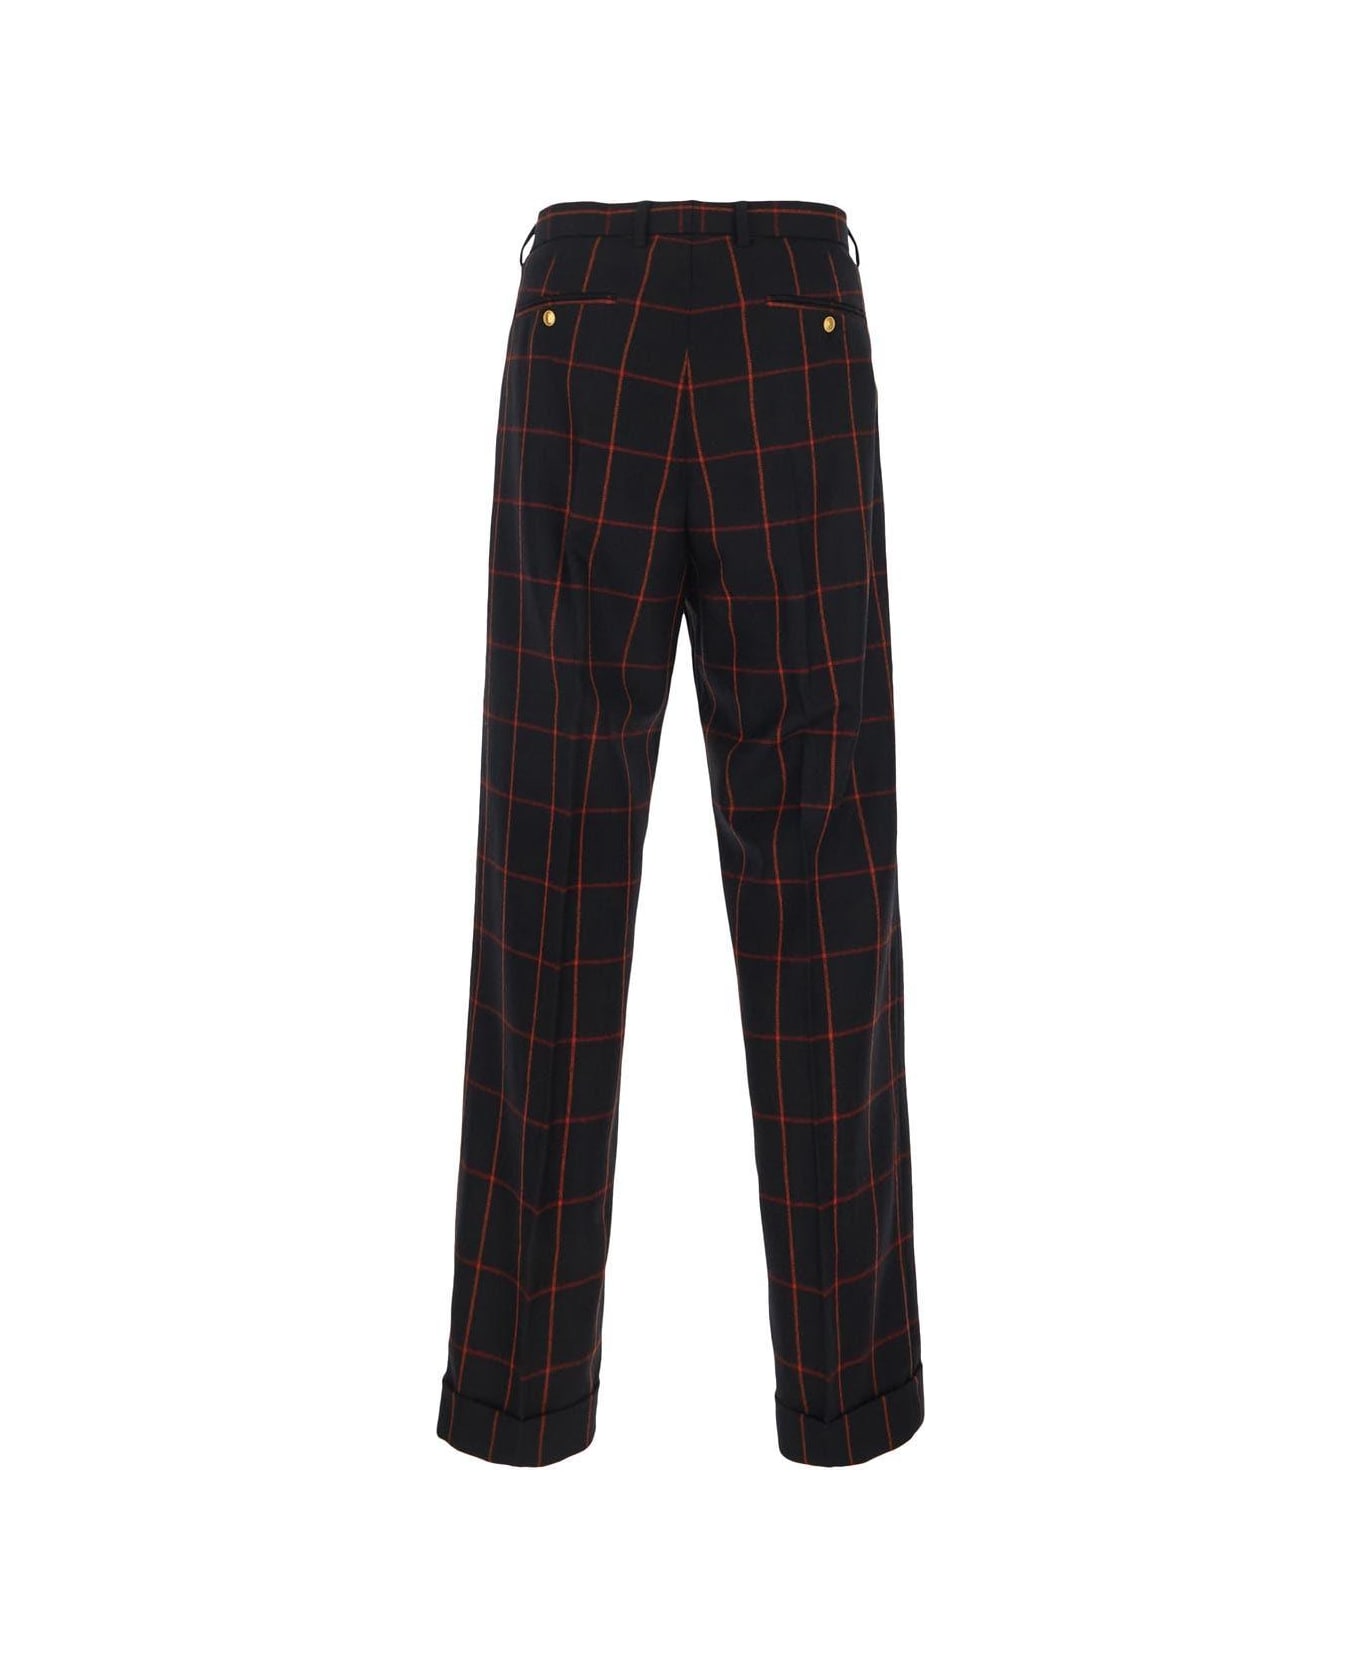 Gucci Check Wool Trousers